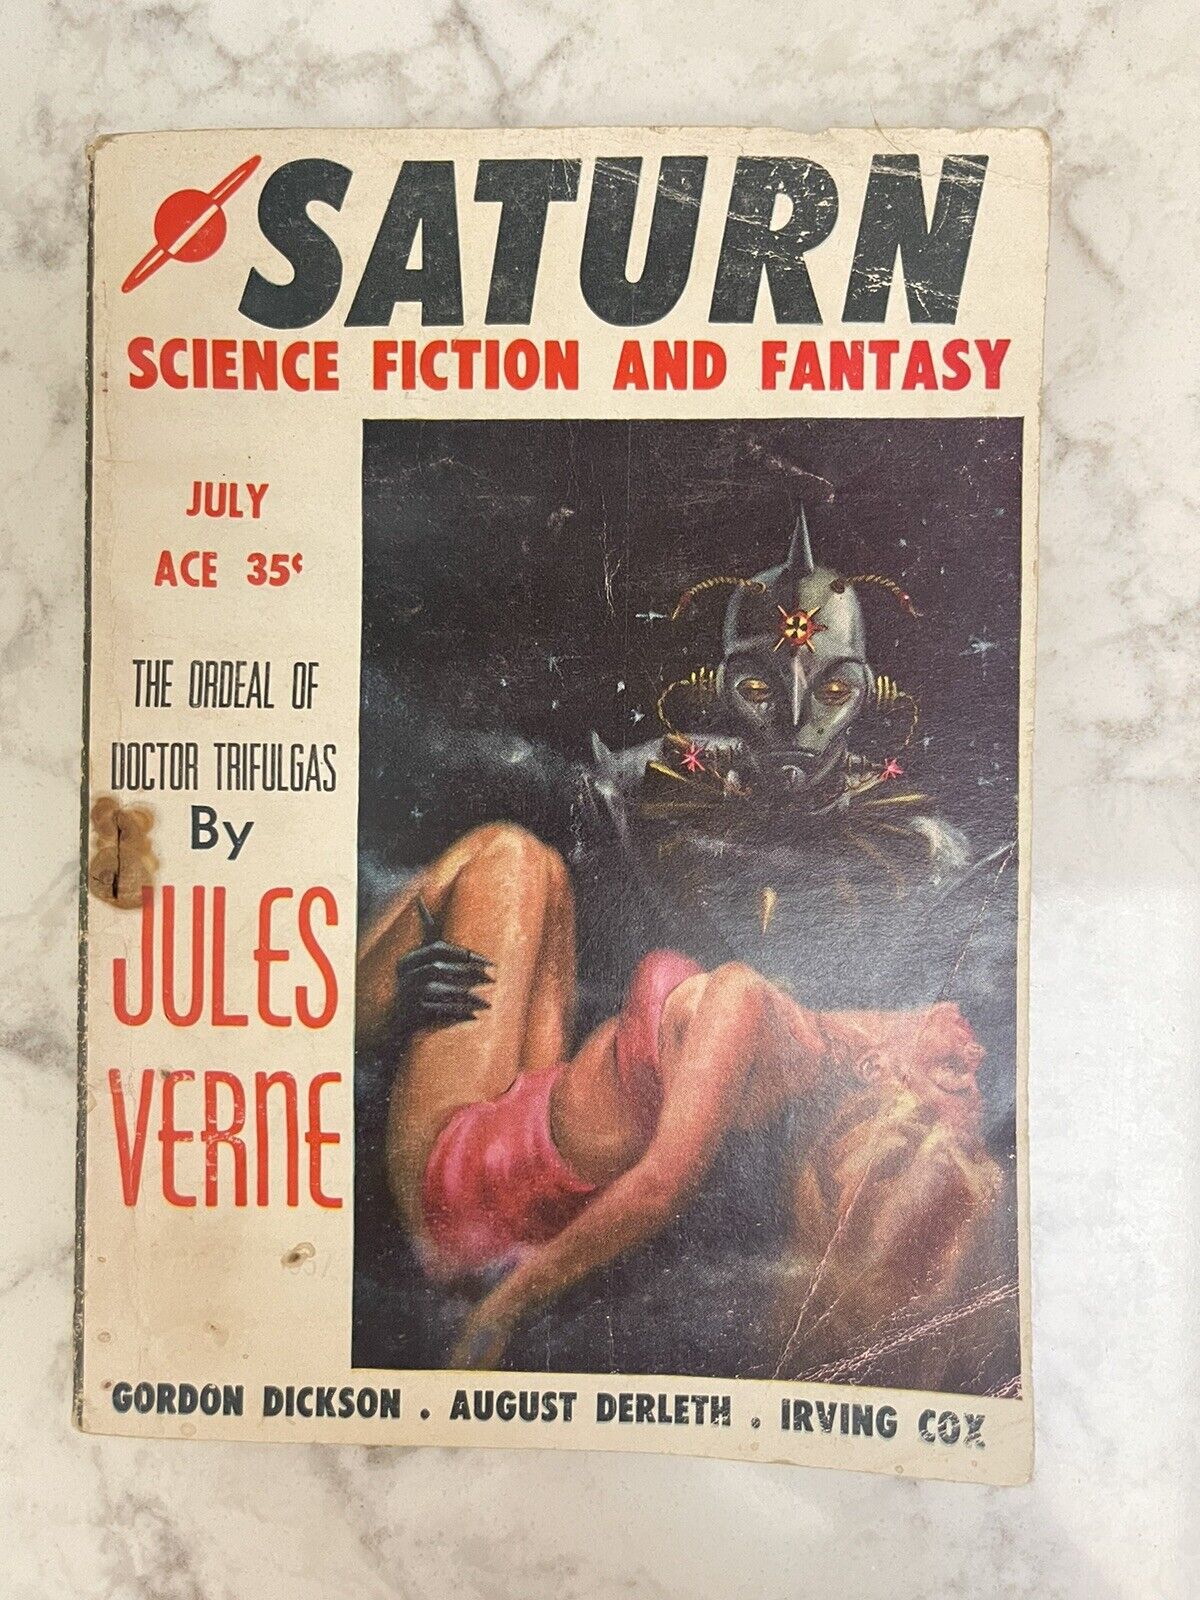 Saturn. Science Fiction And Fantasy The Ordeal… By Jules Verne July 1957